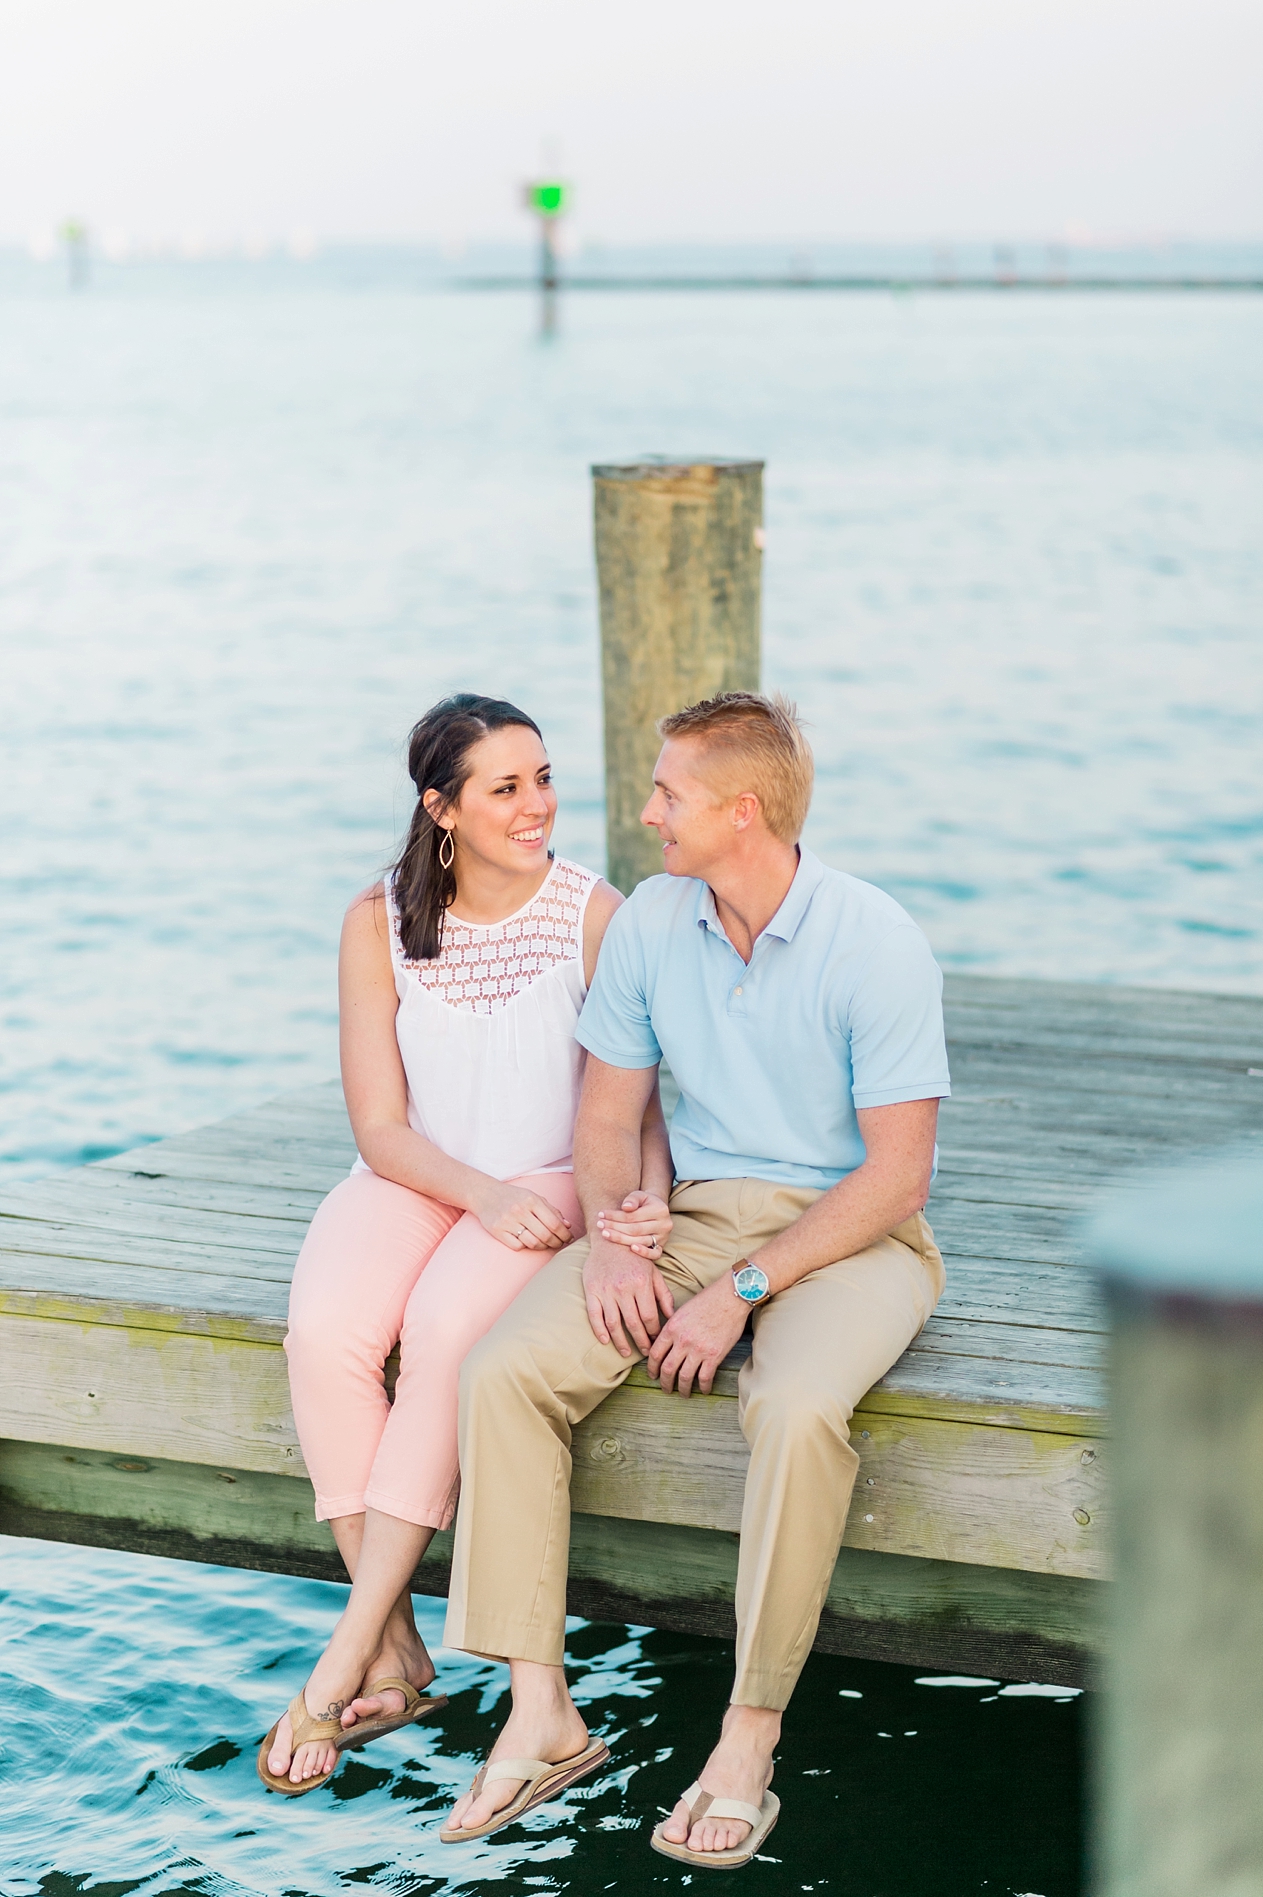 A Classic and Nautical Summertime Engagement session at the Maritime Museum in Annapolis, Maryland | Maryland and Destination Fine Art Photographer | Lauren R Swann | www.laurenrswann.com